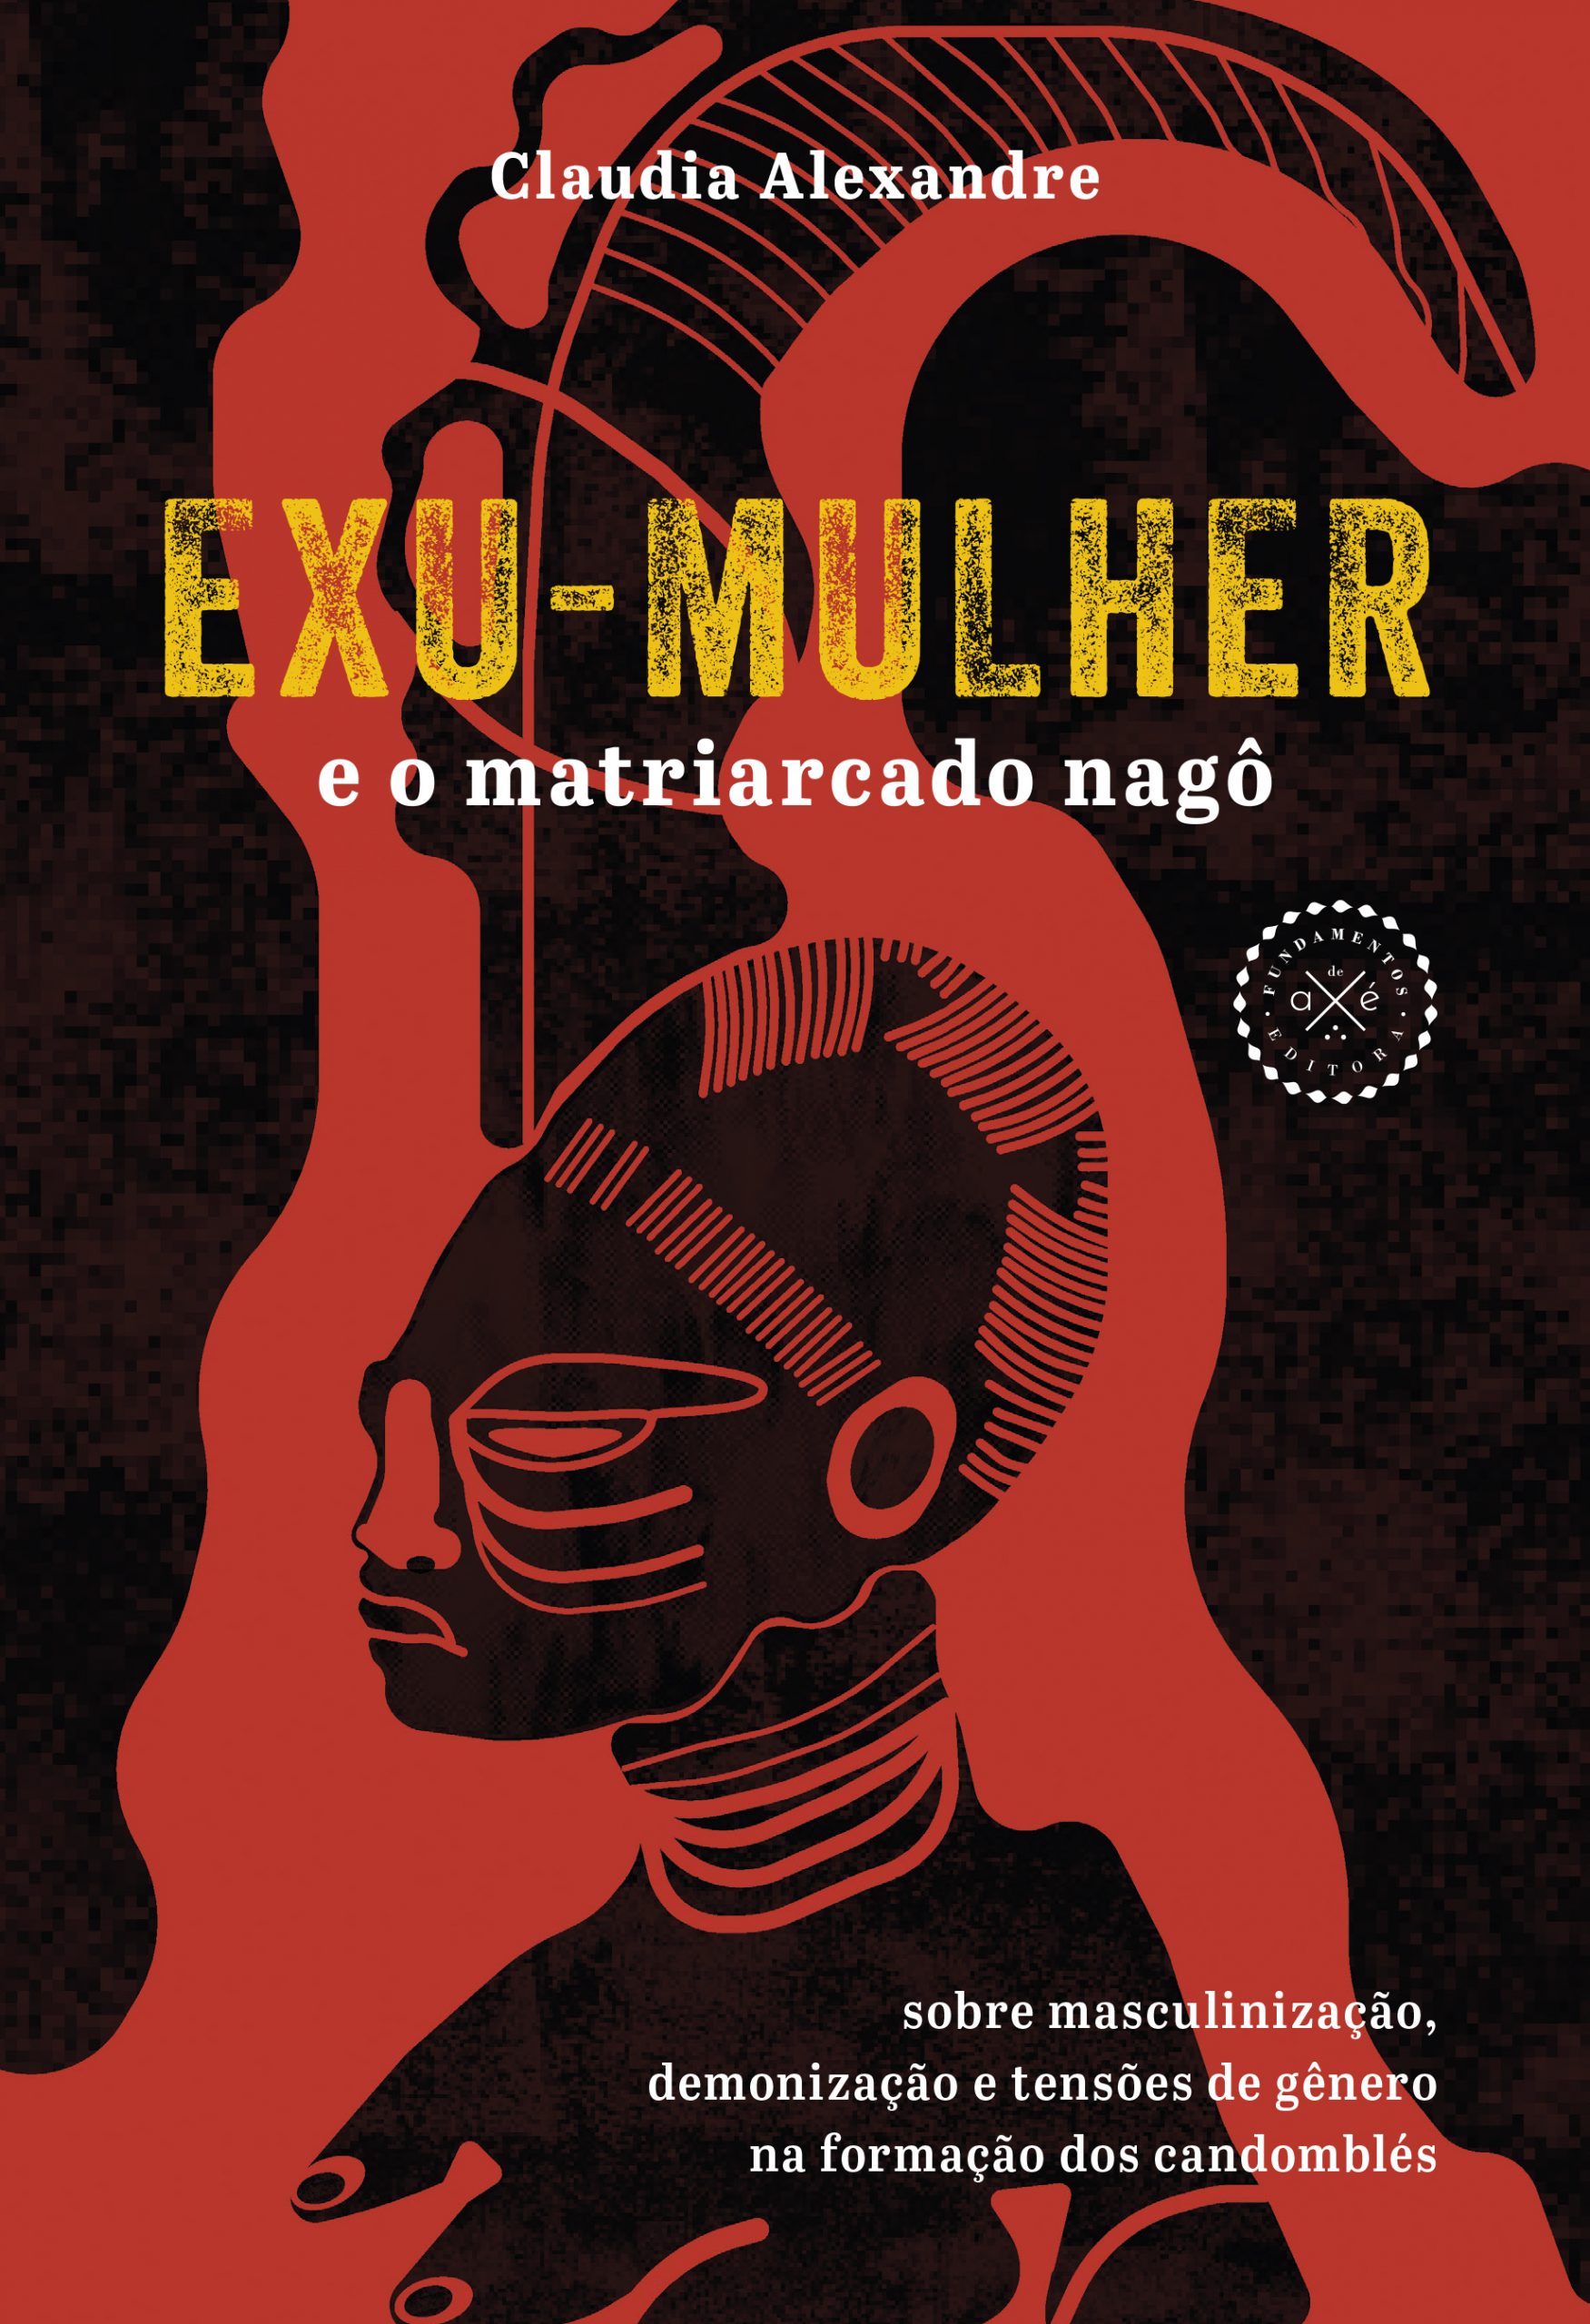 Claudia Alexandre, post-doctoral fellow at the DA, is among the finalists for the Jabuti Academic Award, Axis: Sciences of religion, with the book: “Exu-Mulher e o matriarchado nagô”